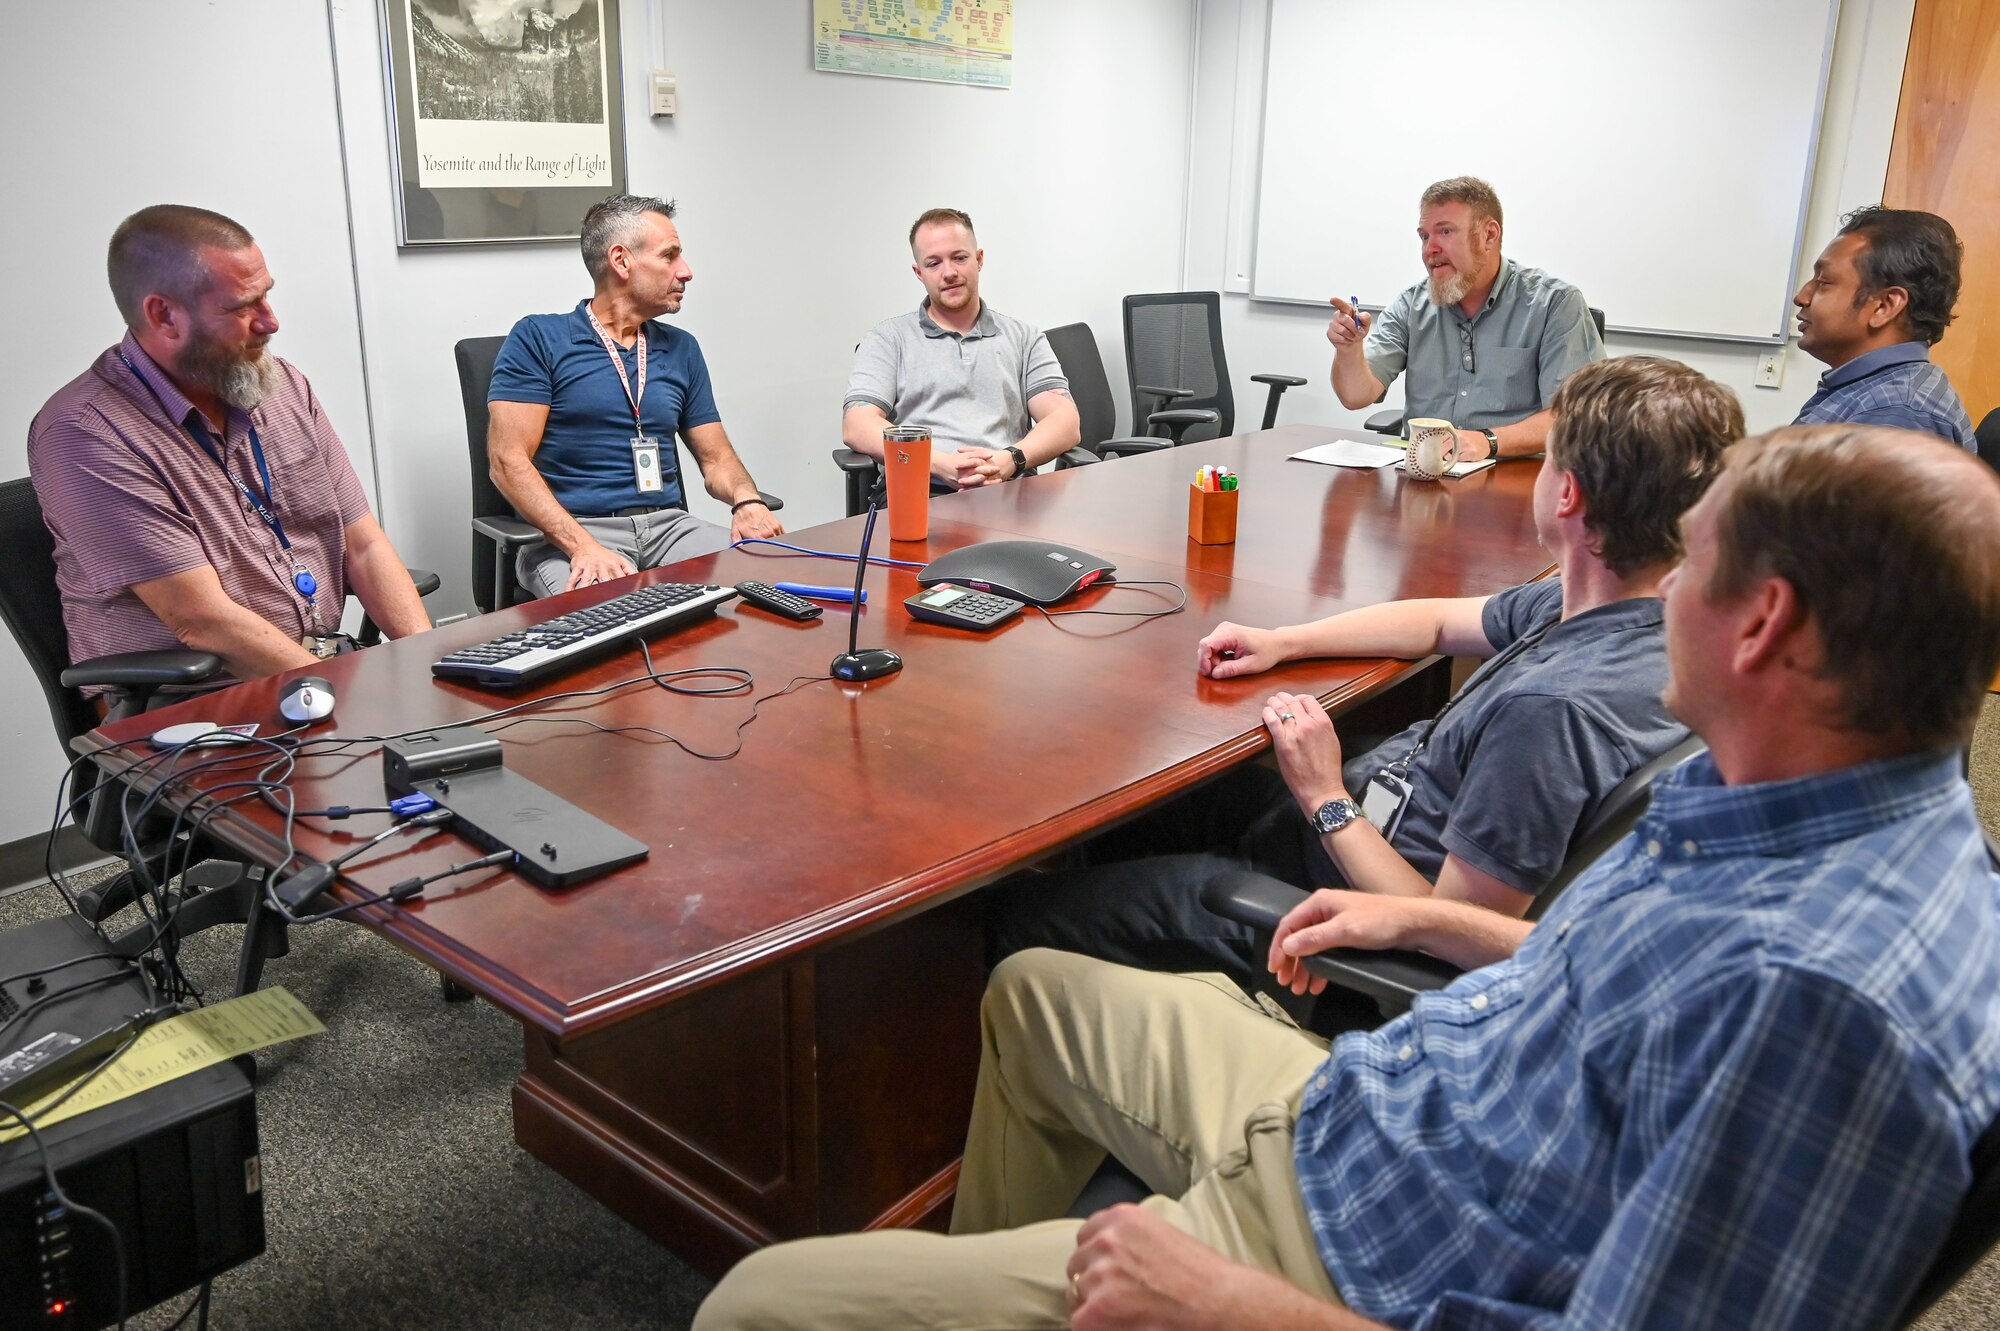 Seven Air Force civilians discuss around a conference table